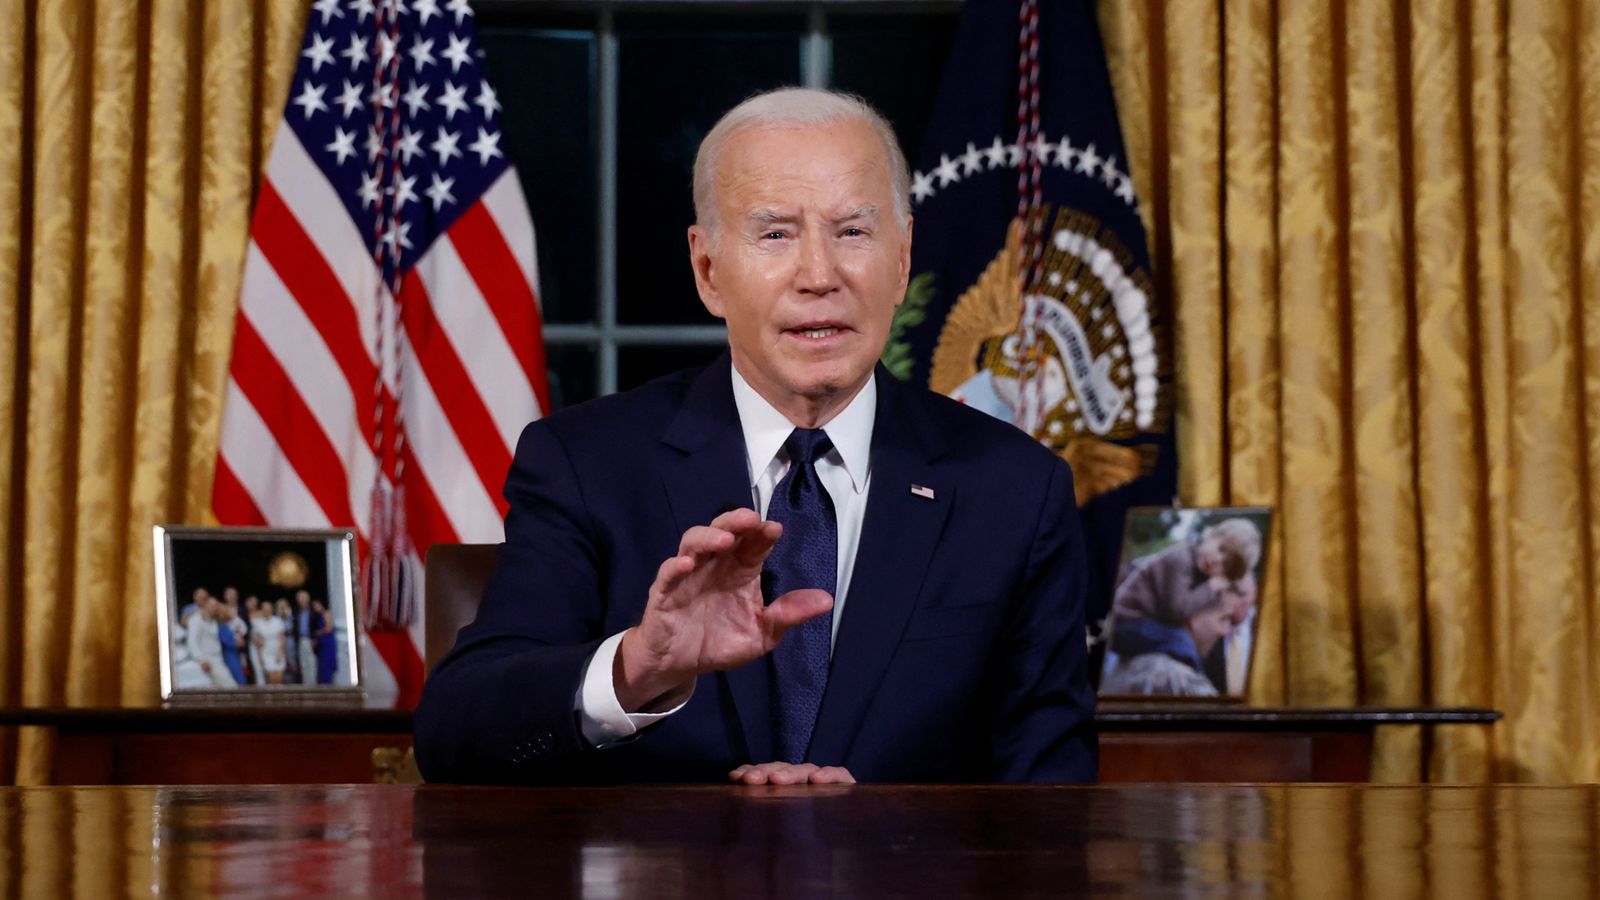 Joe Biden says Putin and Hamas both want to 'annihilate' neighbouring democracies in address from Oval Office